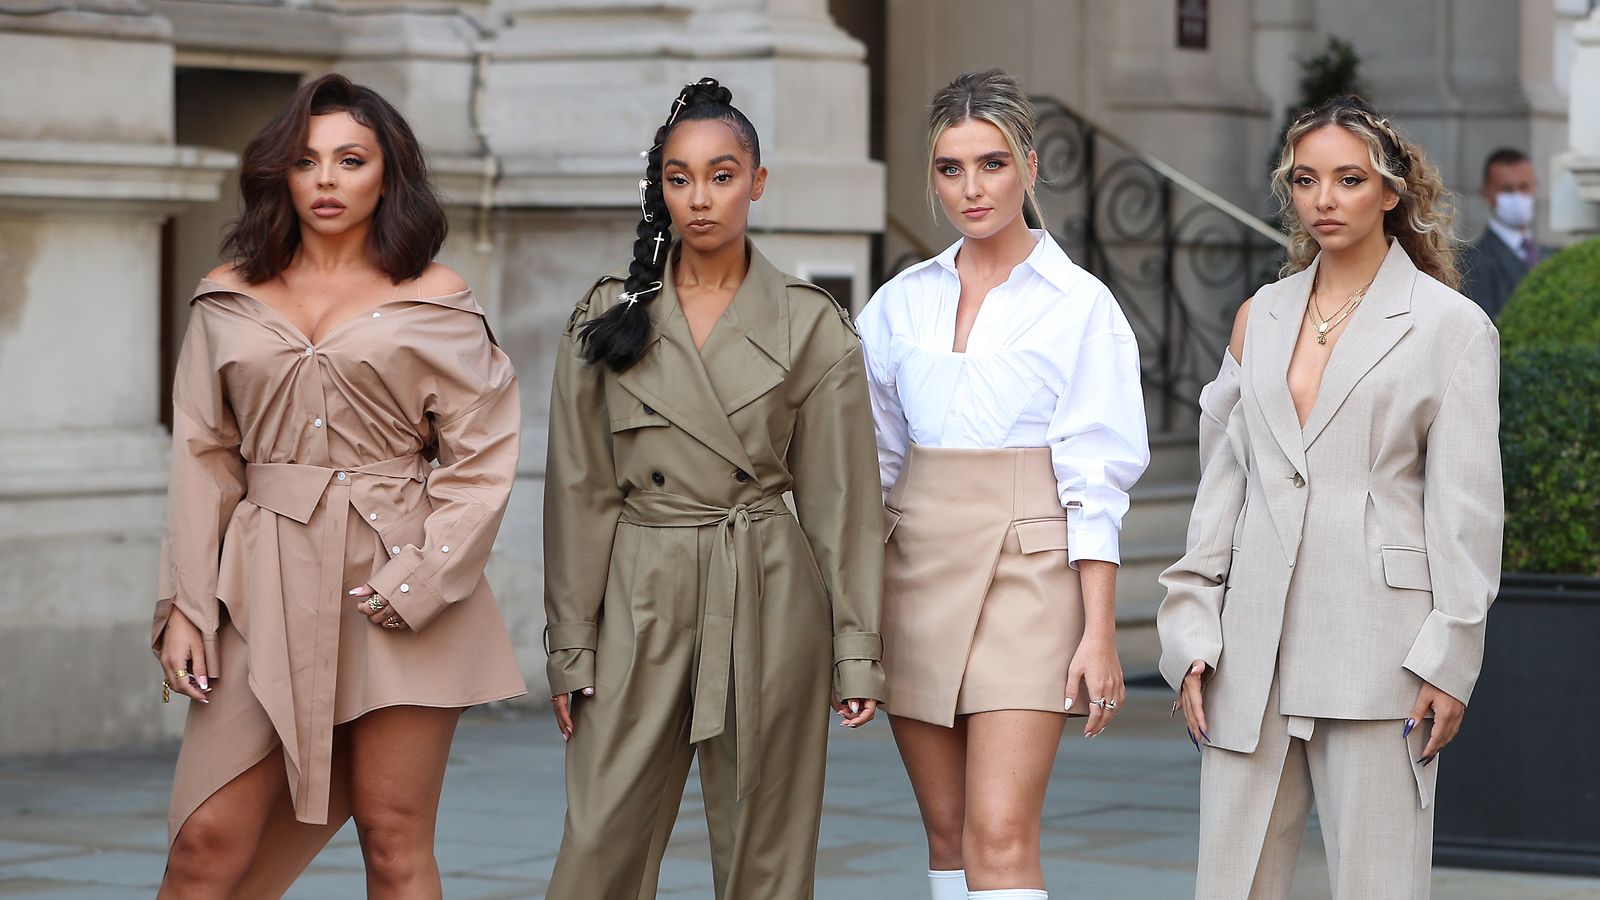 Little Mix: Leigh-Anne Pinnock says band went to therapy after Jesy Nelson exit